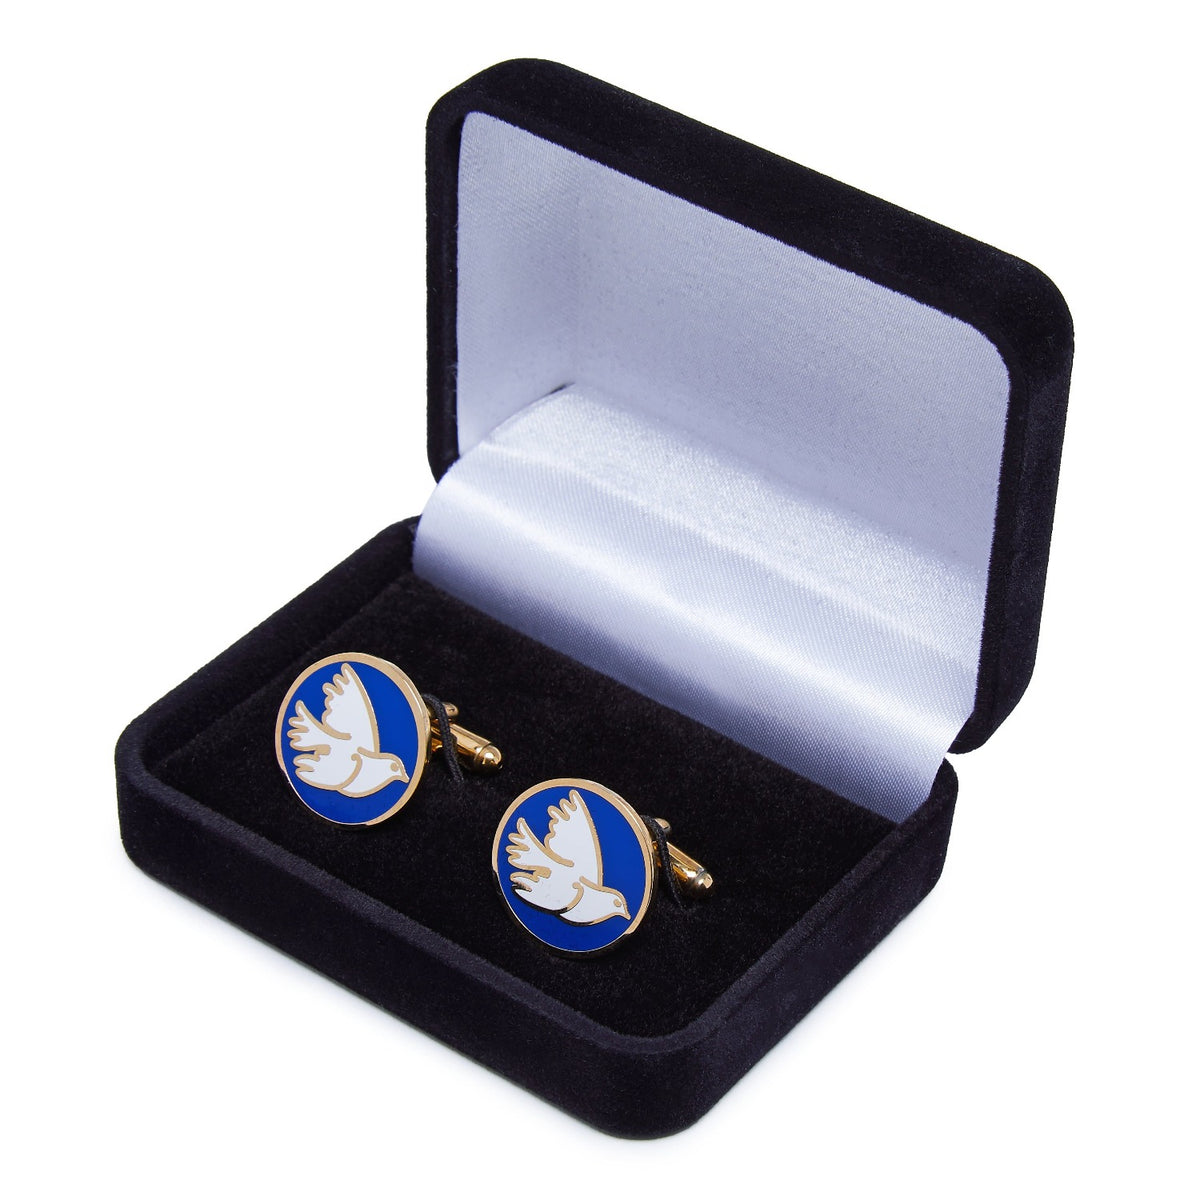 Dove Cufflinks - For Your Eyes Only